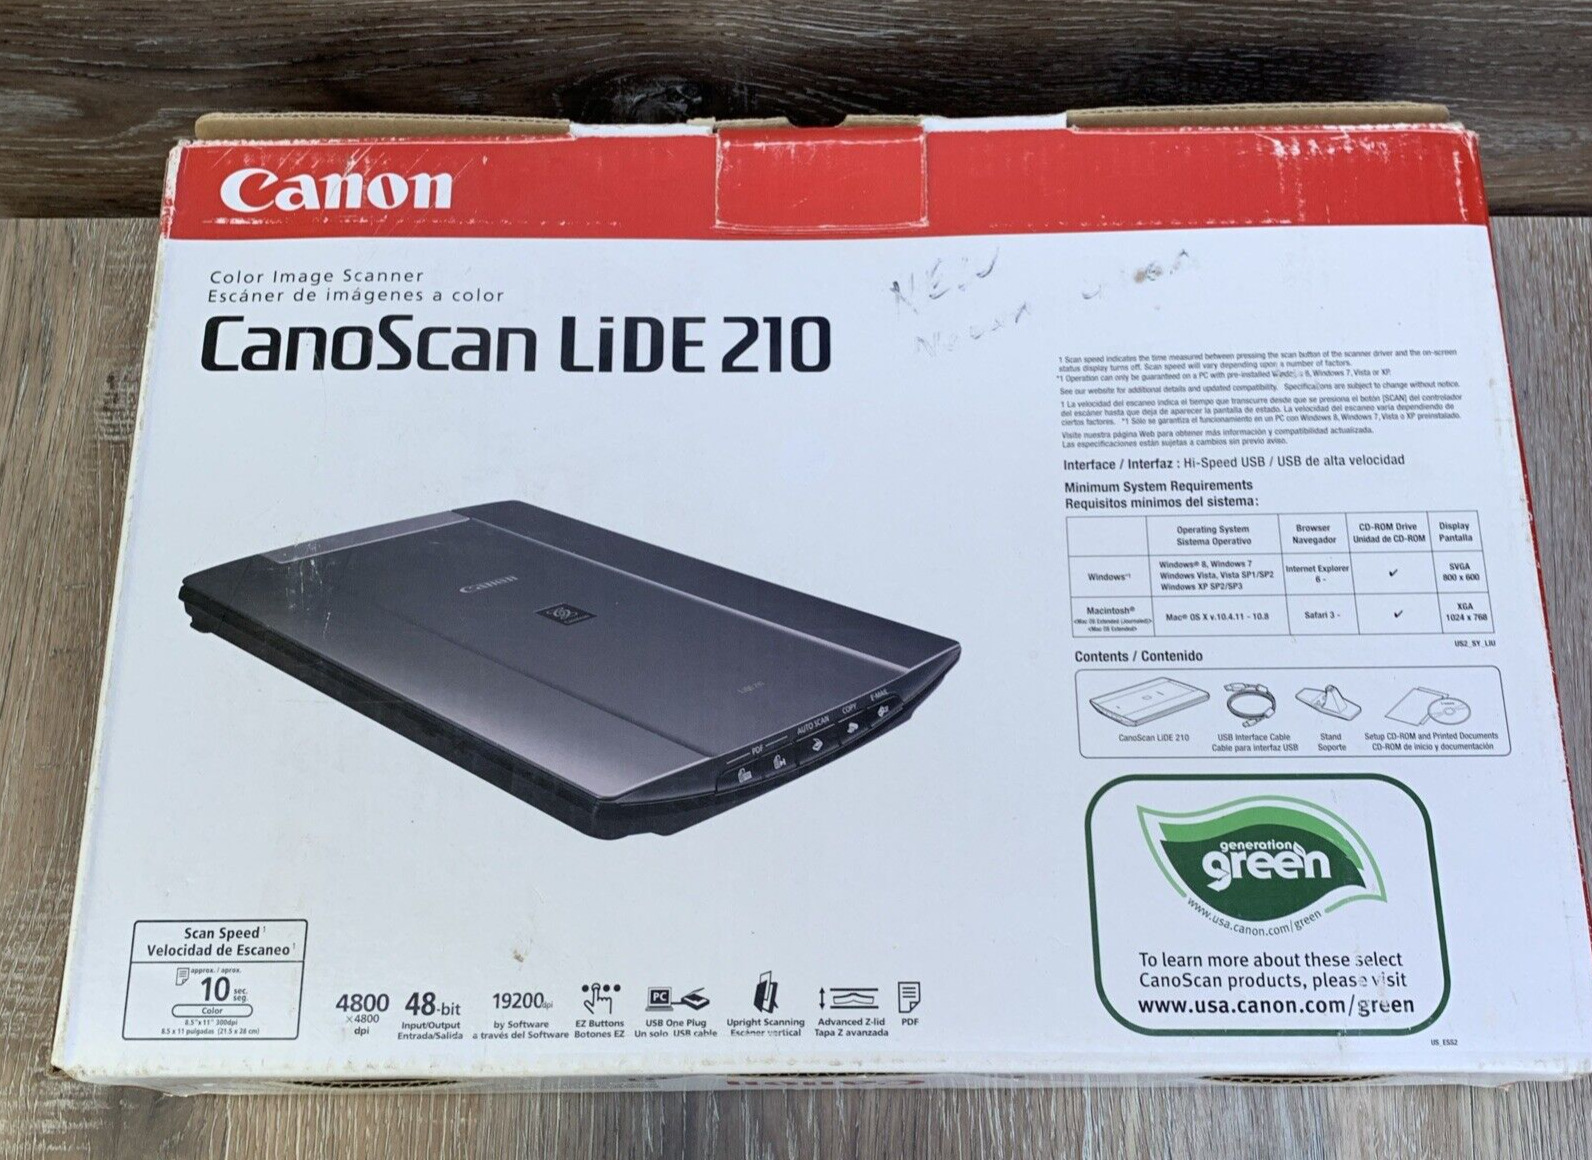 New Canon CanoScan LiDE210 Flatbed Scanner USB Color Image Software CD not inclu